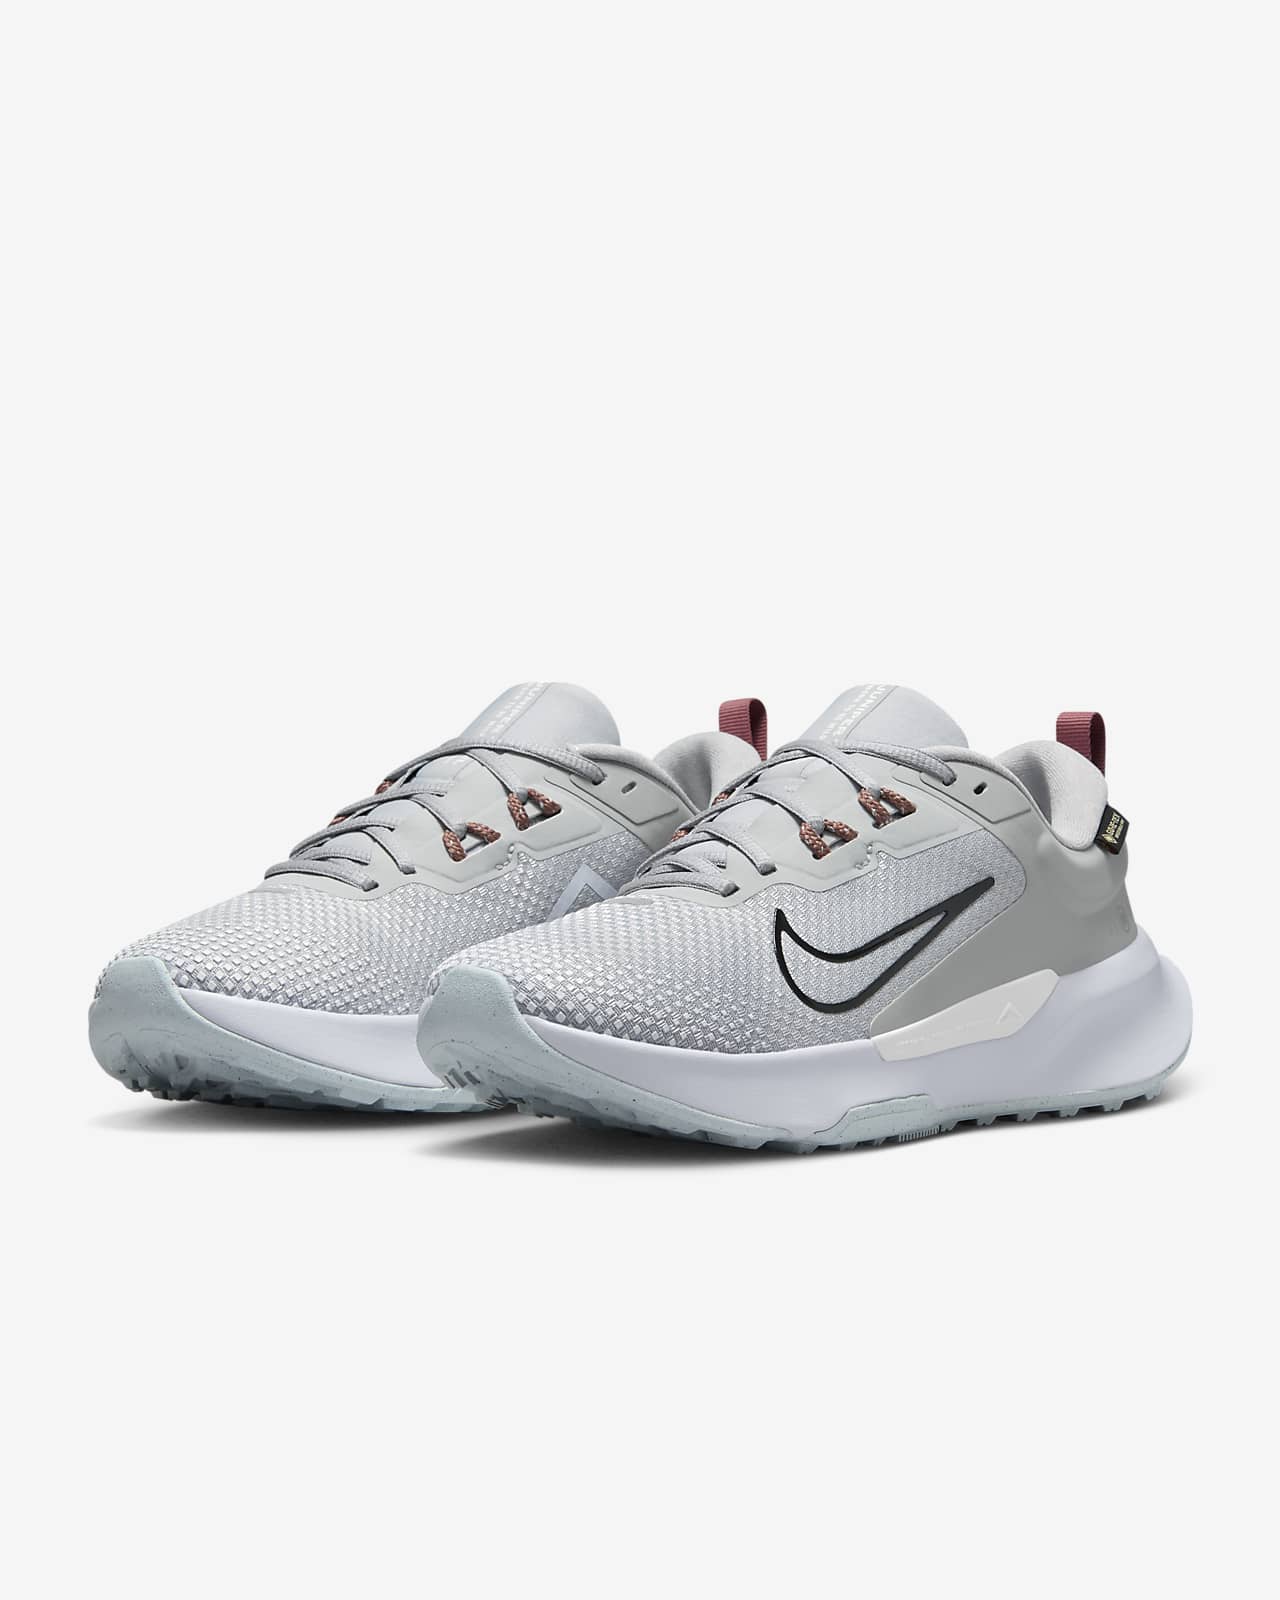 https://static.nike.com/a/images/t_PDP_1280_v1/f_auto,q_auto:eco/61b1c271-c95e-4c65-b28c-a1e0ca1f8fd0/juniper-trail-2-gore-tex-womens-waterproof-trail-running-shoes-XmqHnc.png